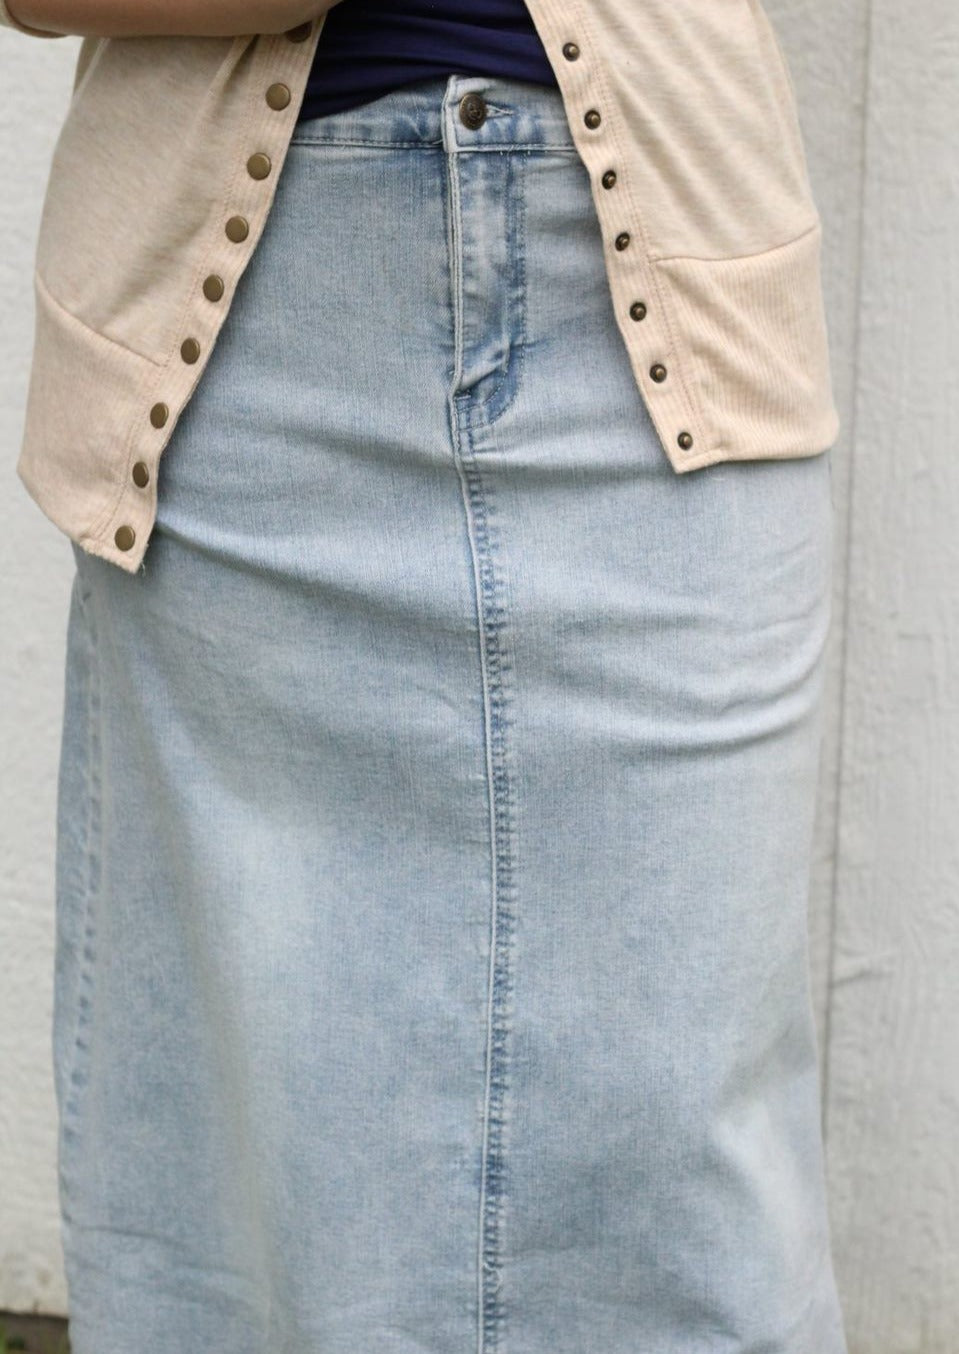 Long straight denim skirt in light wash with distressed/frayed ends